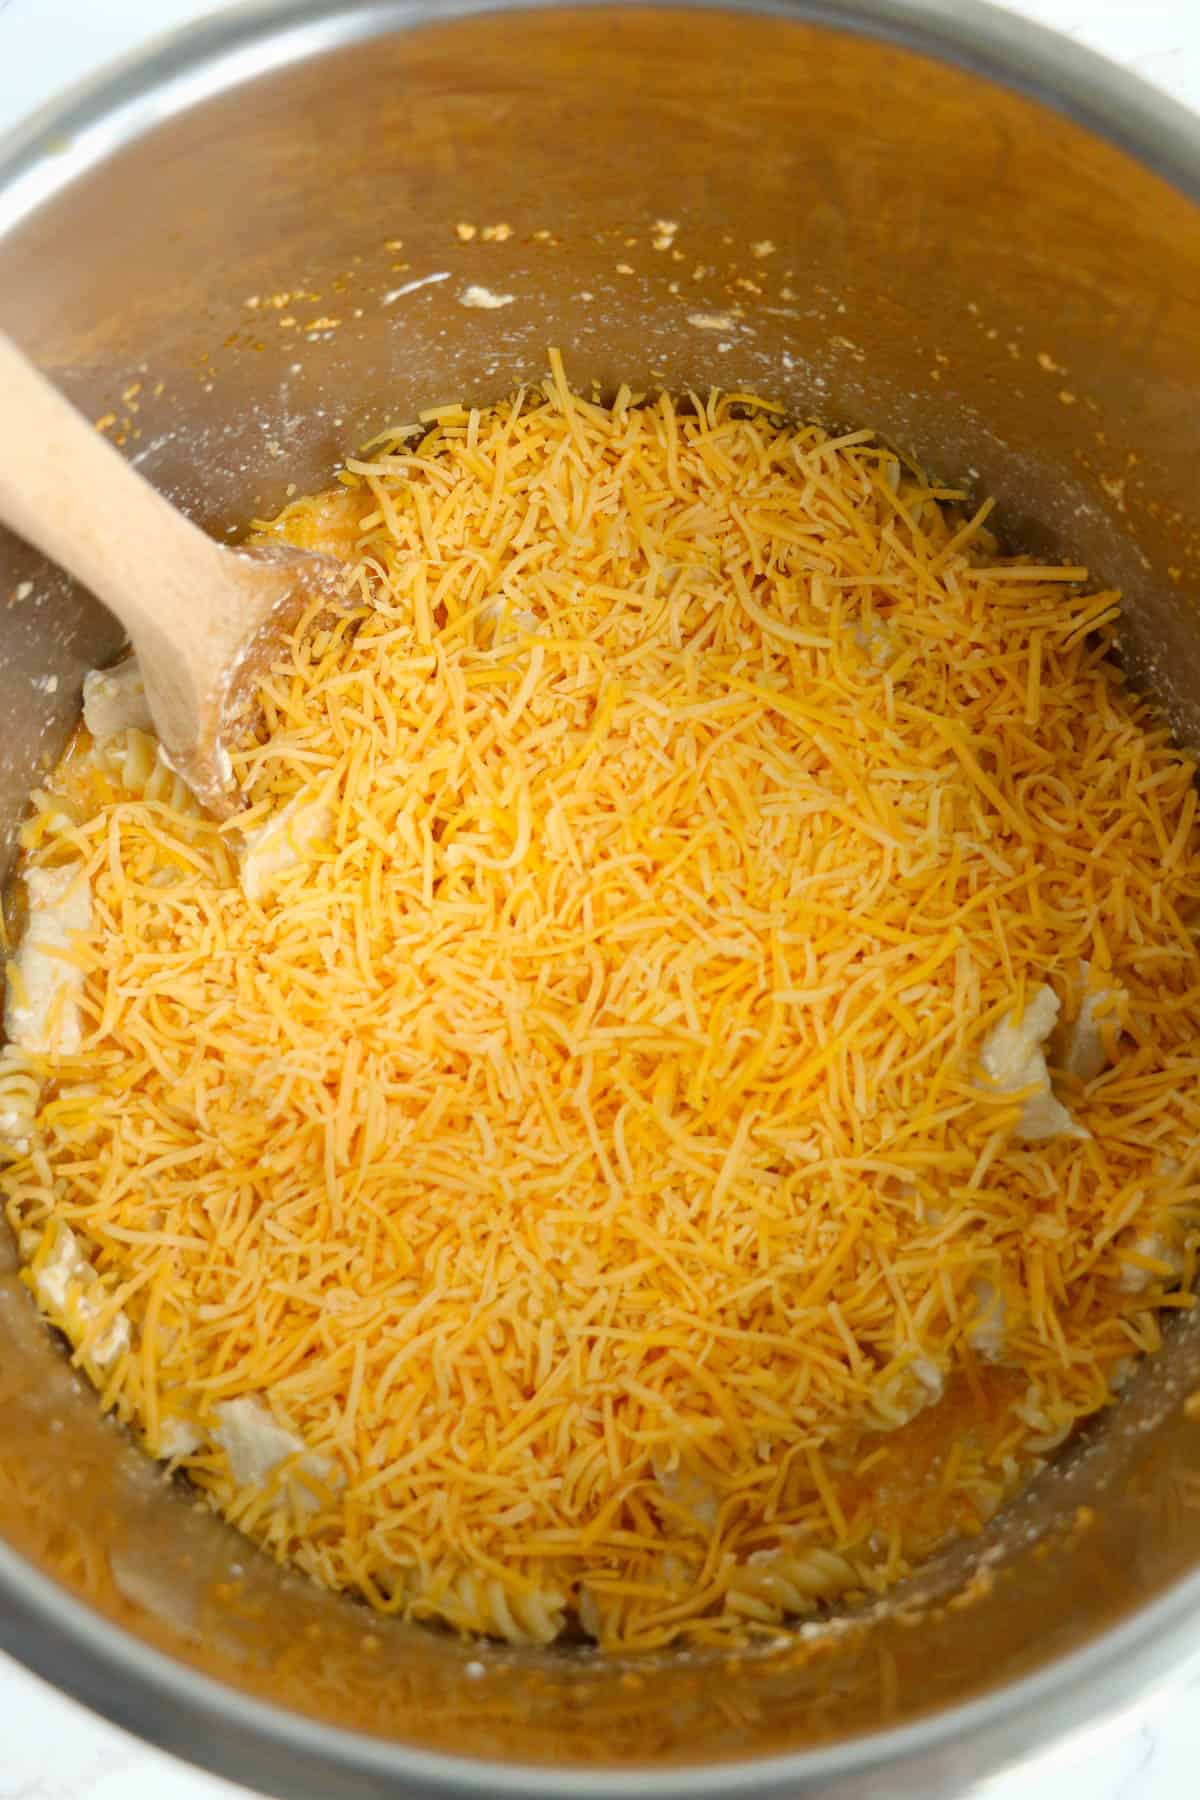 Adding shredded cheddar cheese to other ingredients in the instant pot.